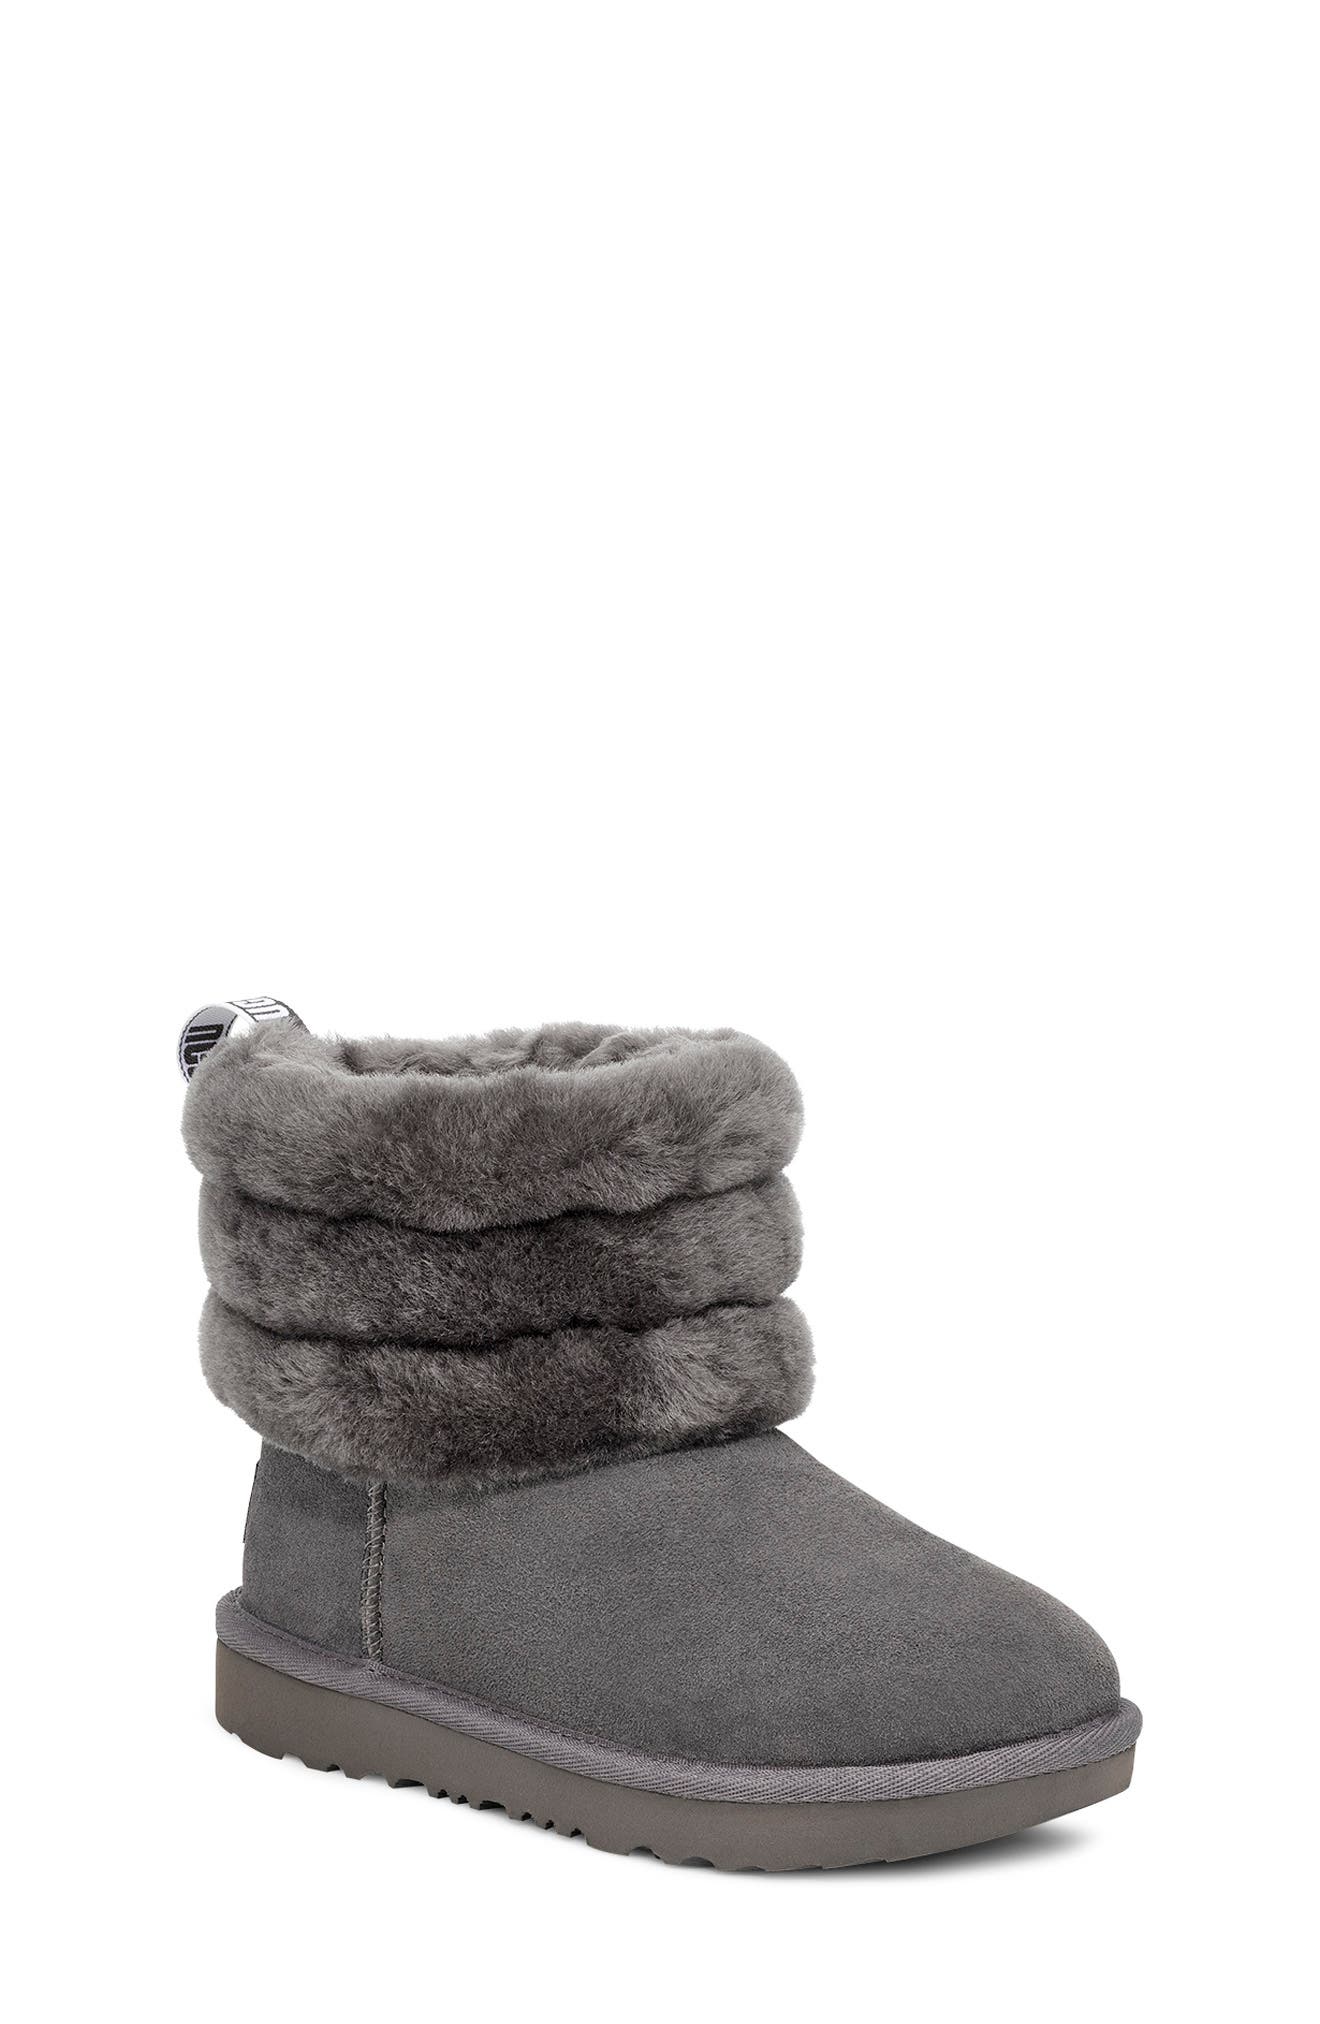 ugg fluff mini quilted bootie